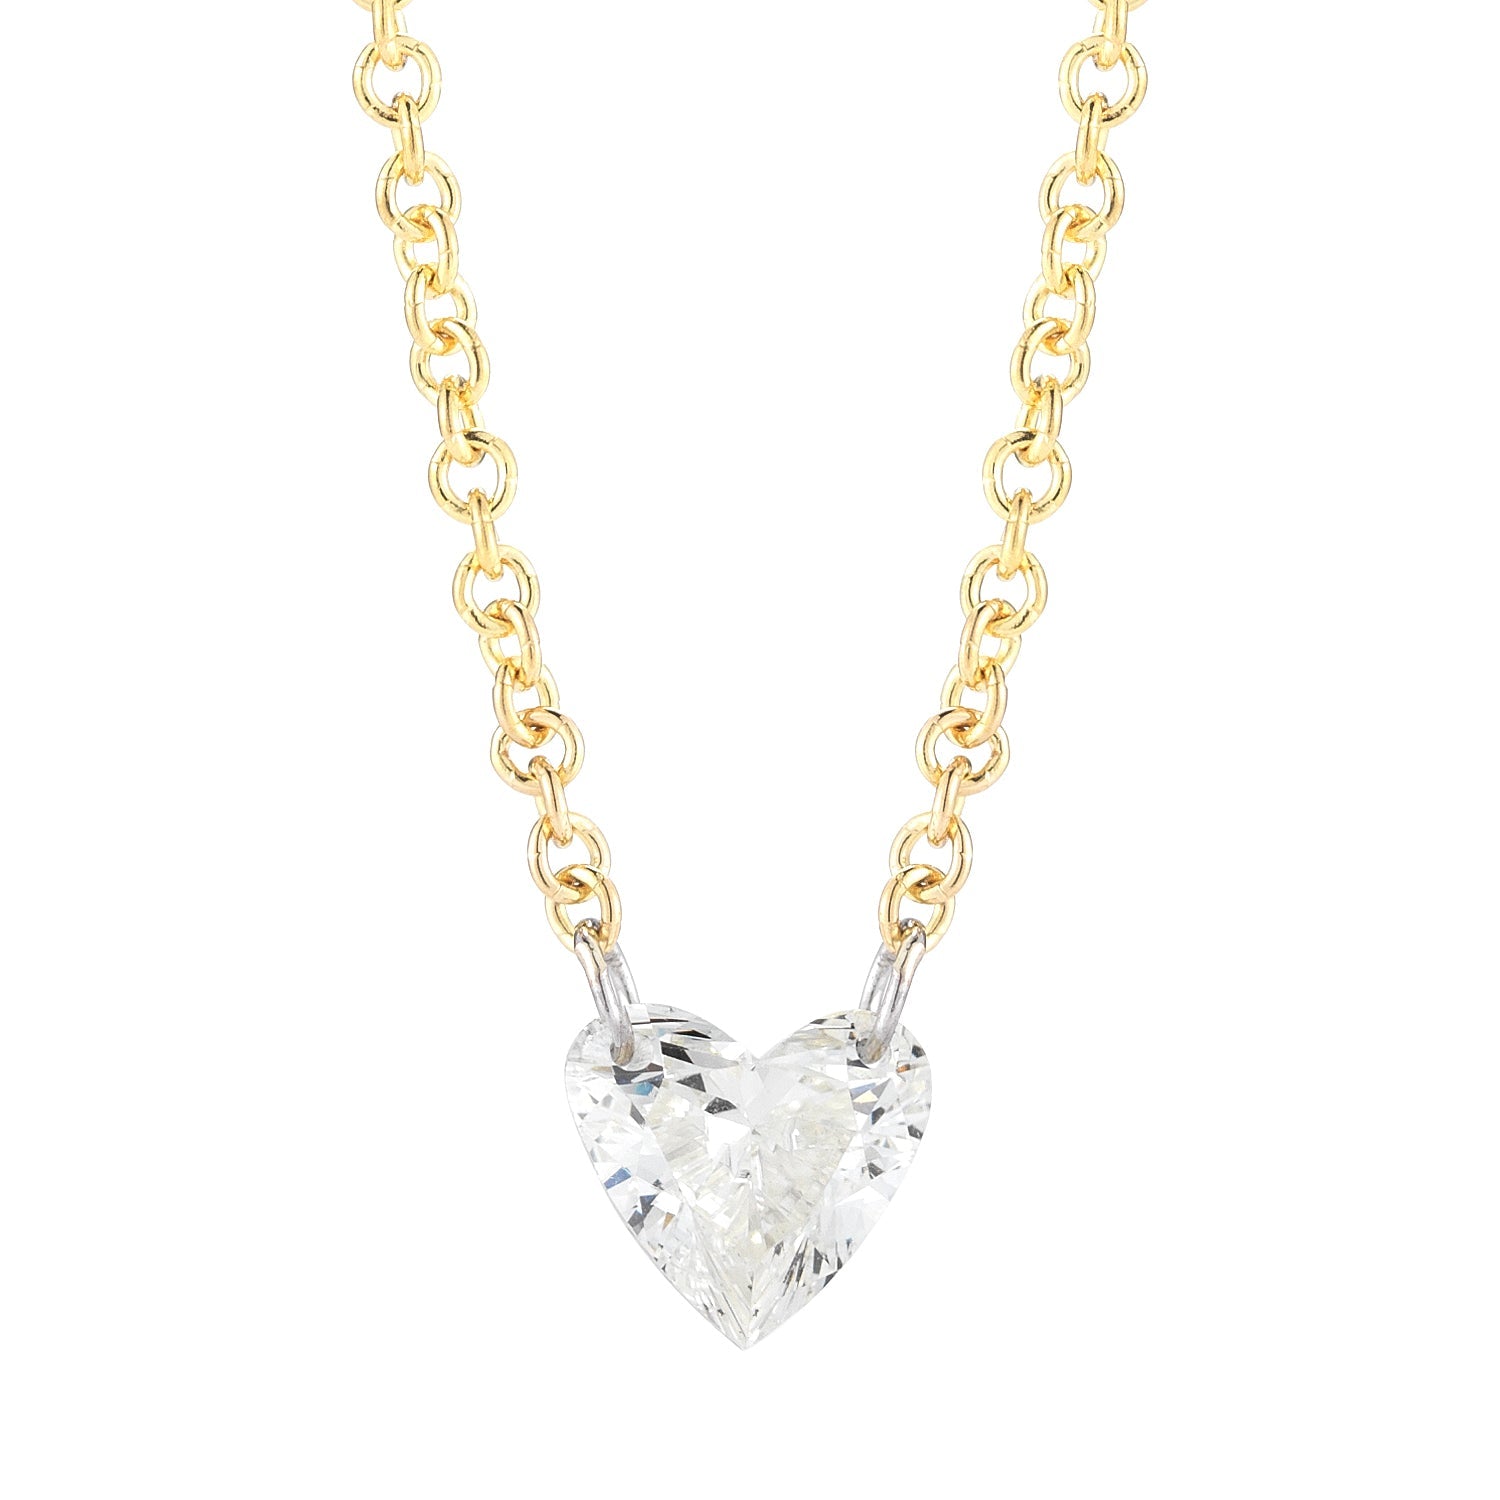 Greenleaf & Crosby - 0.47ct Heart-Shaped Diamond Floating Solitaire Pendant